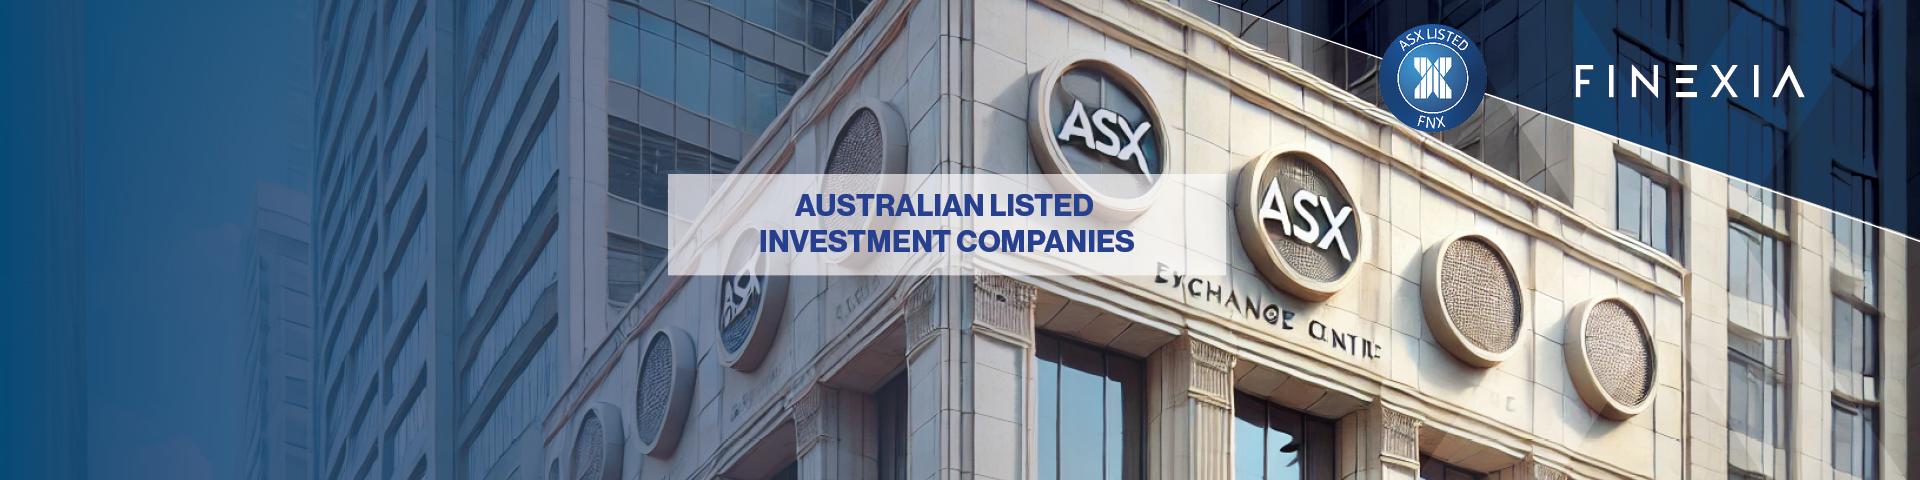 Australian Listed Investment Companies